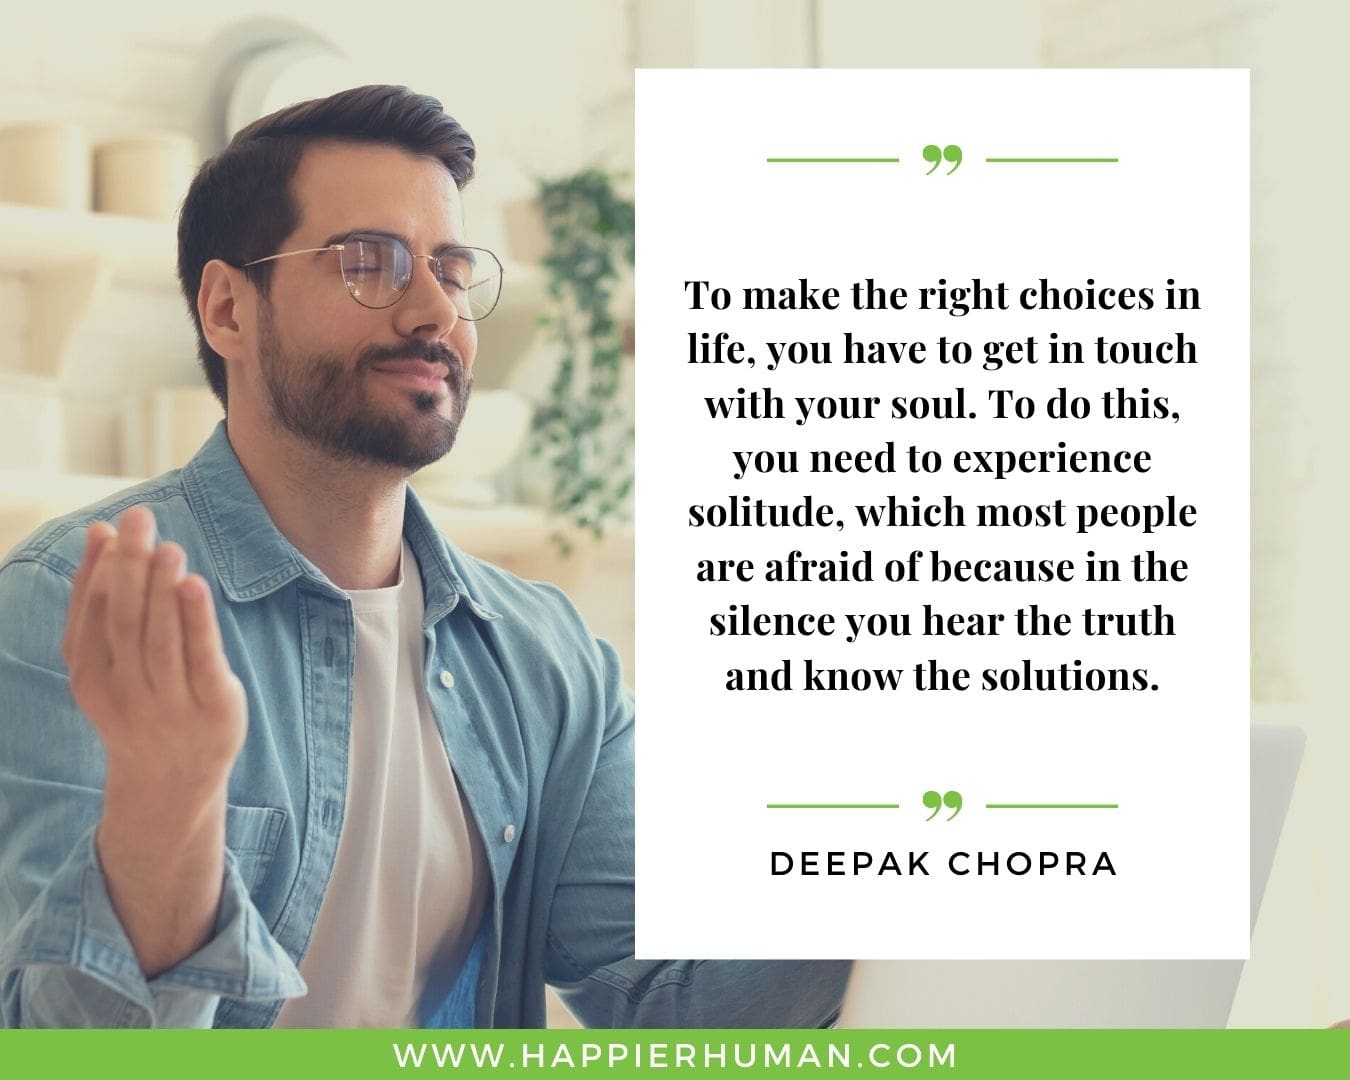 Loneliness Quotes - “To make the right choices in life, you have to get in touch with your soul. To do this, you need to experience solitude, which most people are afraid of because in the silence you hear the truth and know the solutions.”– Deepak Chopra